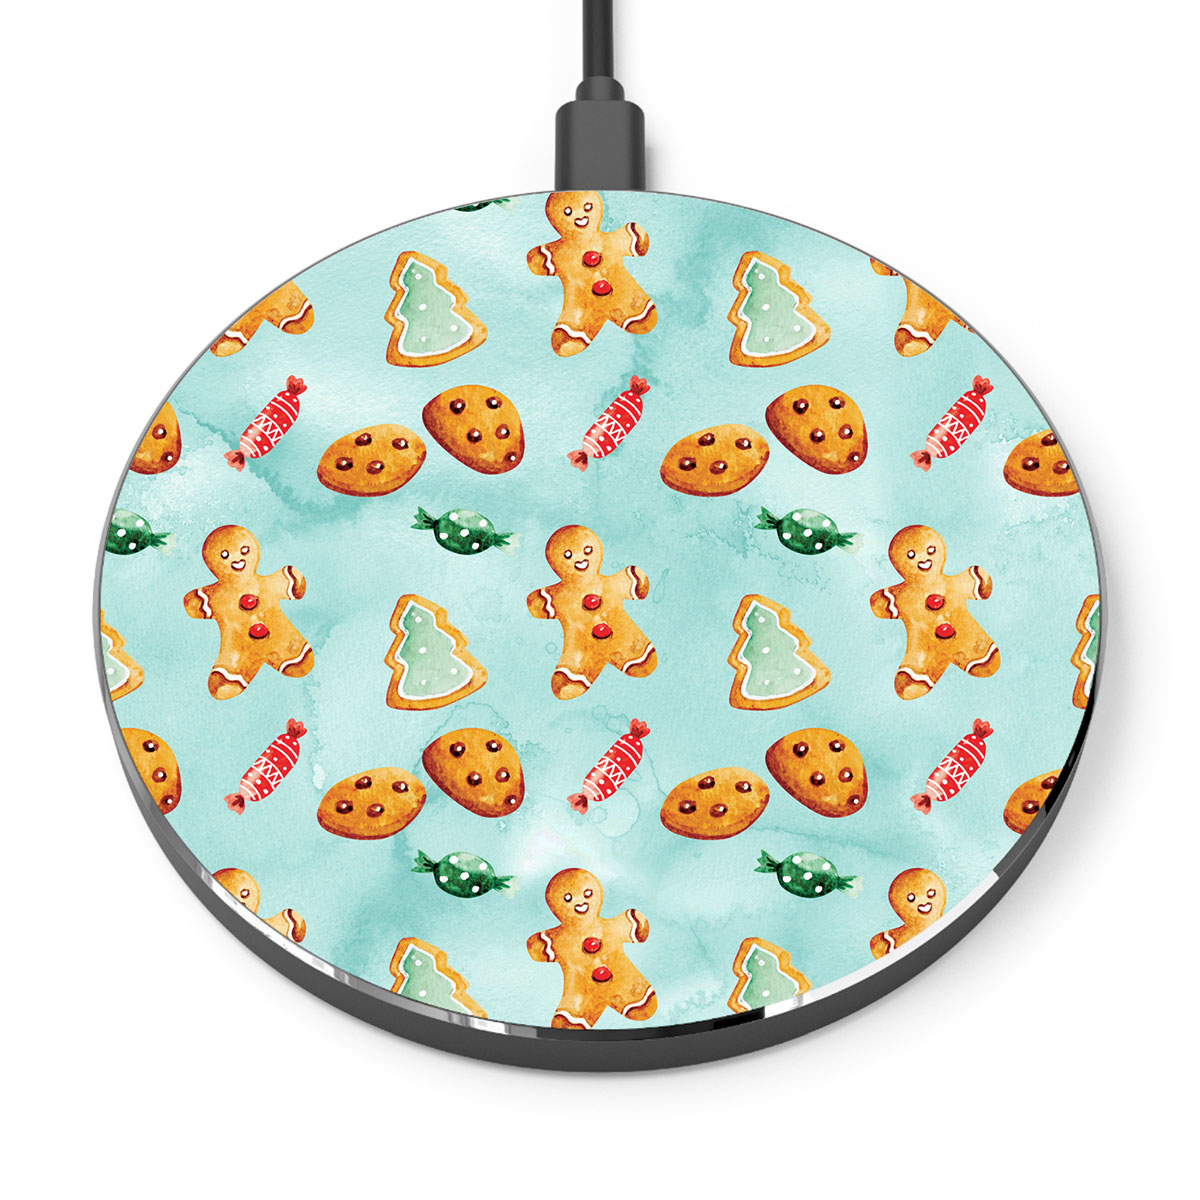 Gingerbread, Christmas Candy, Gingerbread Man Cookies Printed Wireless Charger